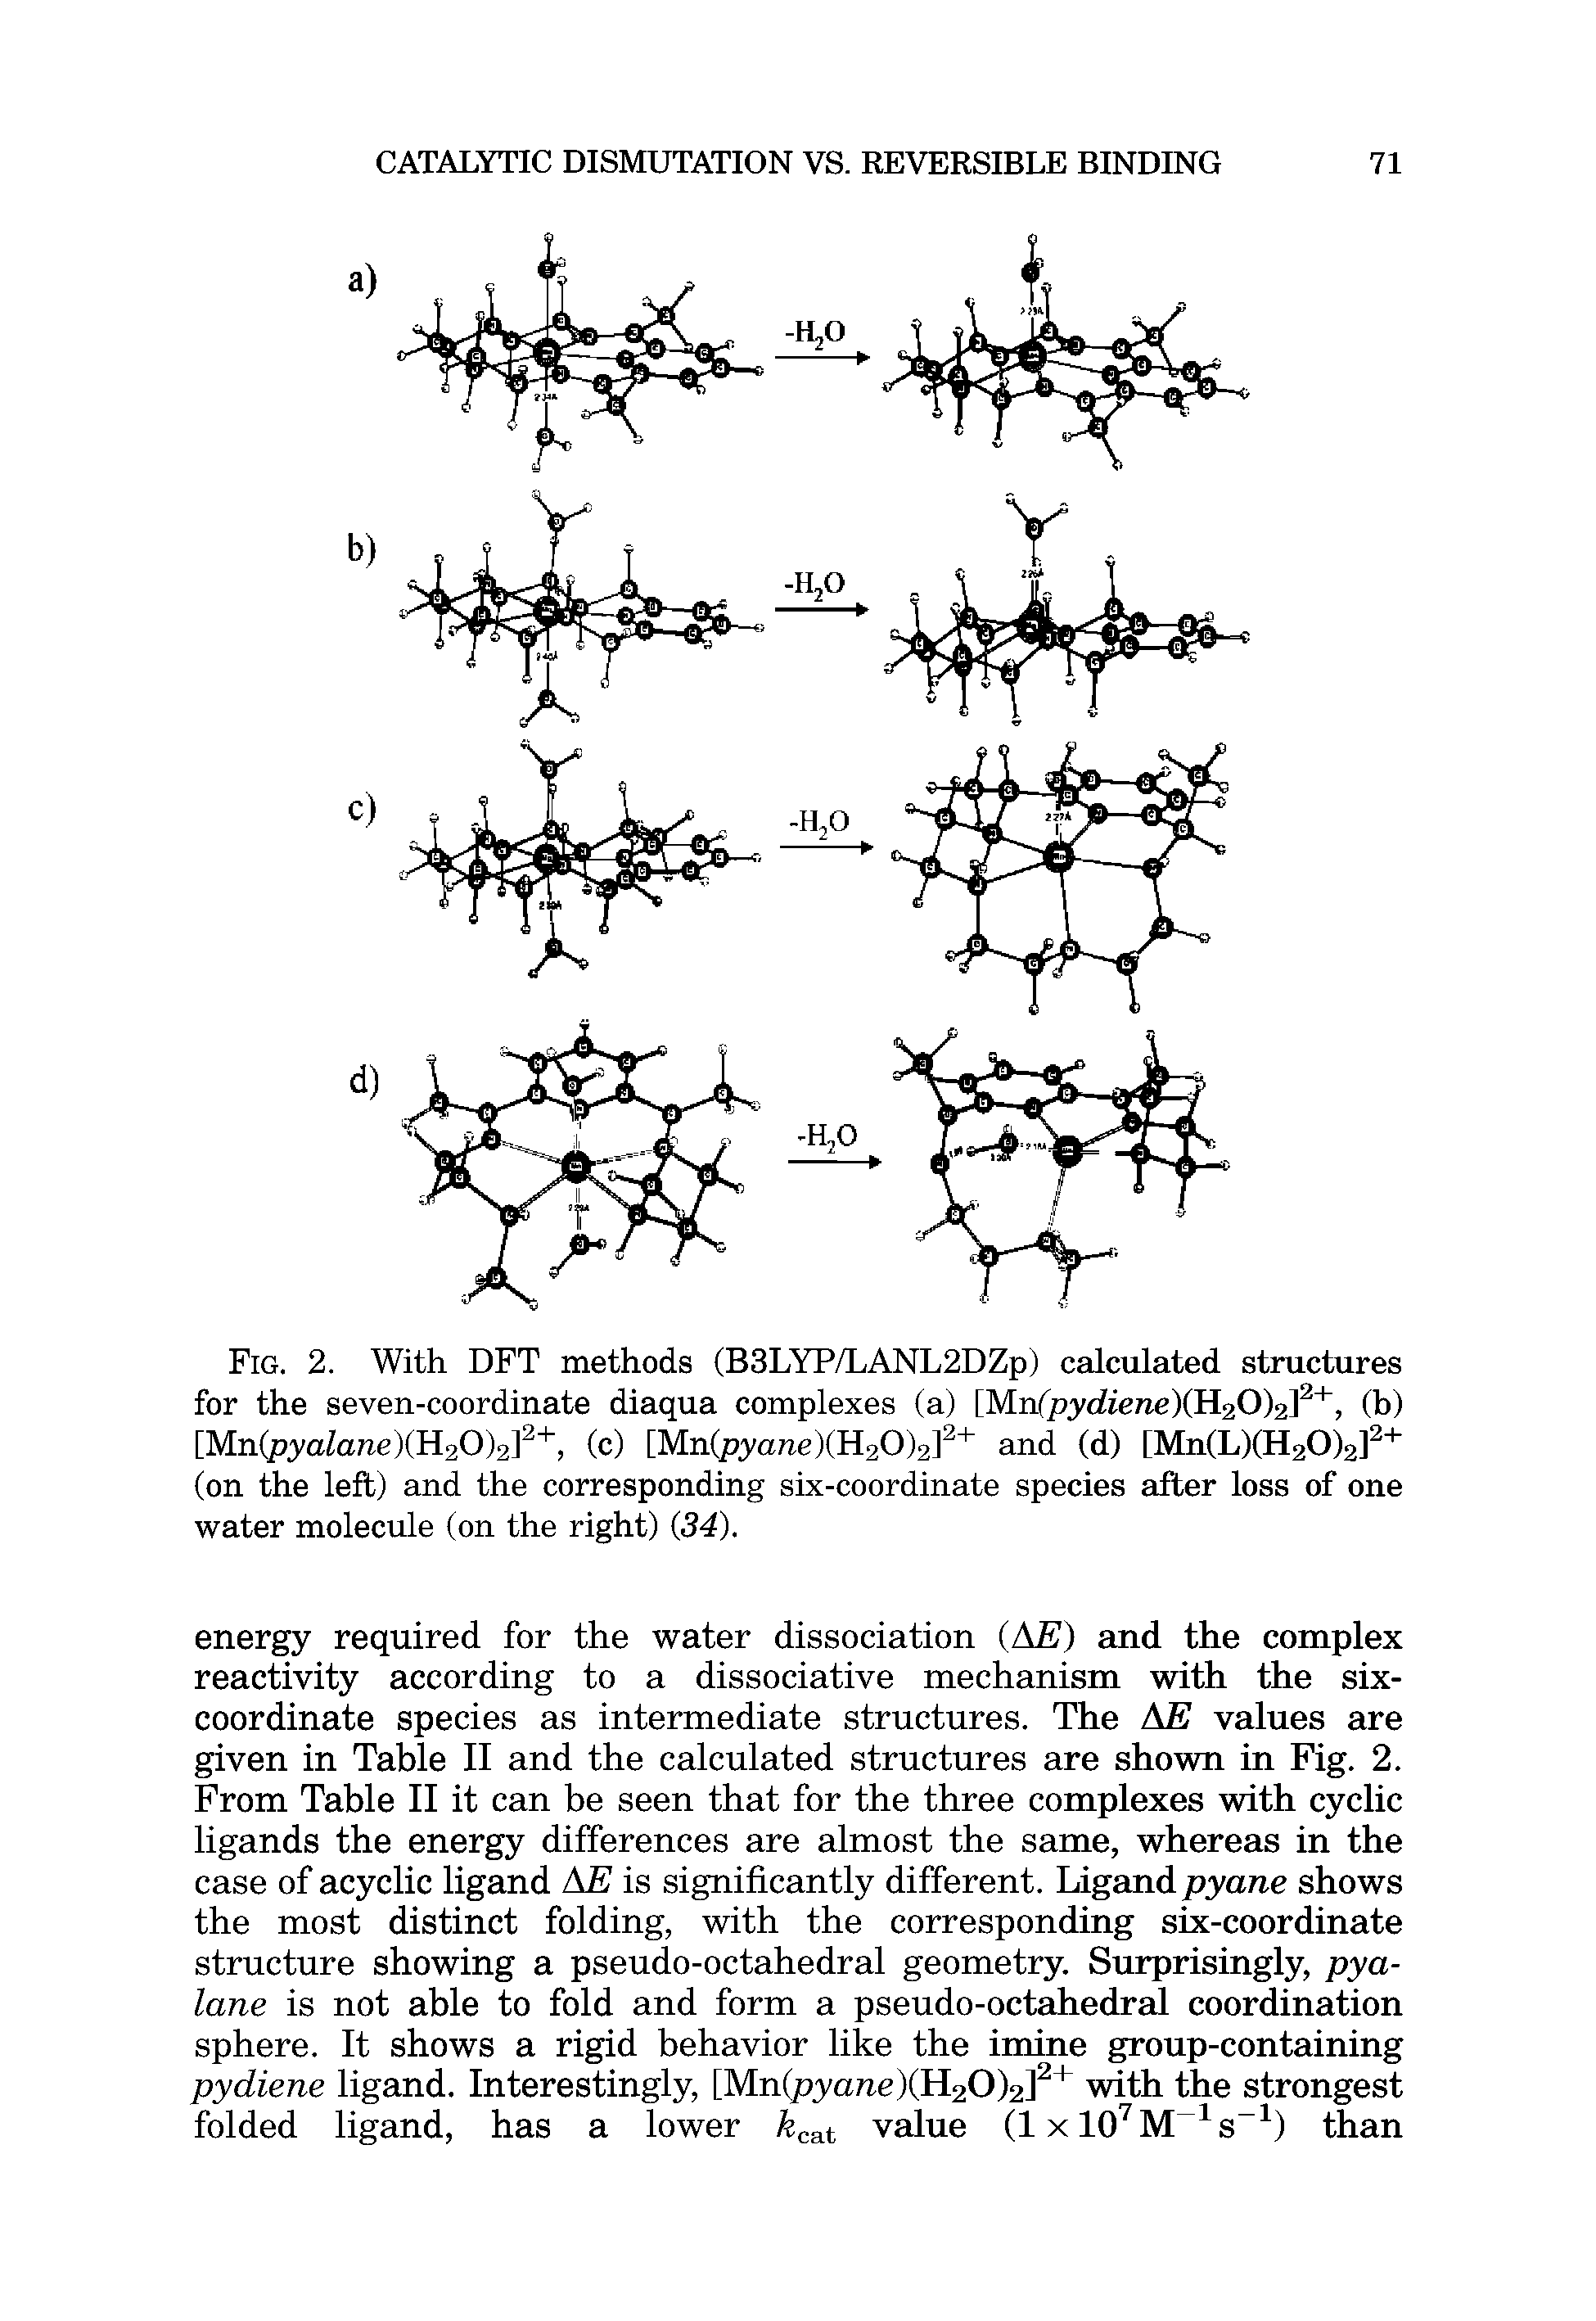 Fig. 2. With DFT methods (B3LYP/LANL2DZp) calculated structures for the seven-coordinate diaqua complexes (a) [M.r (pydiene)(Ji20), (h) Ma pyalane)Qii20)2f, (c) [Mn(pyane)(H20)2] " and (d) [Mn(L)(H20)2] (on the left) and the corresponding six-coordinate species after loss of one water molecule (on the right) 34).